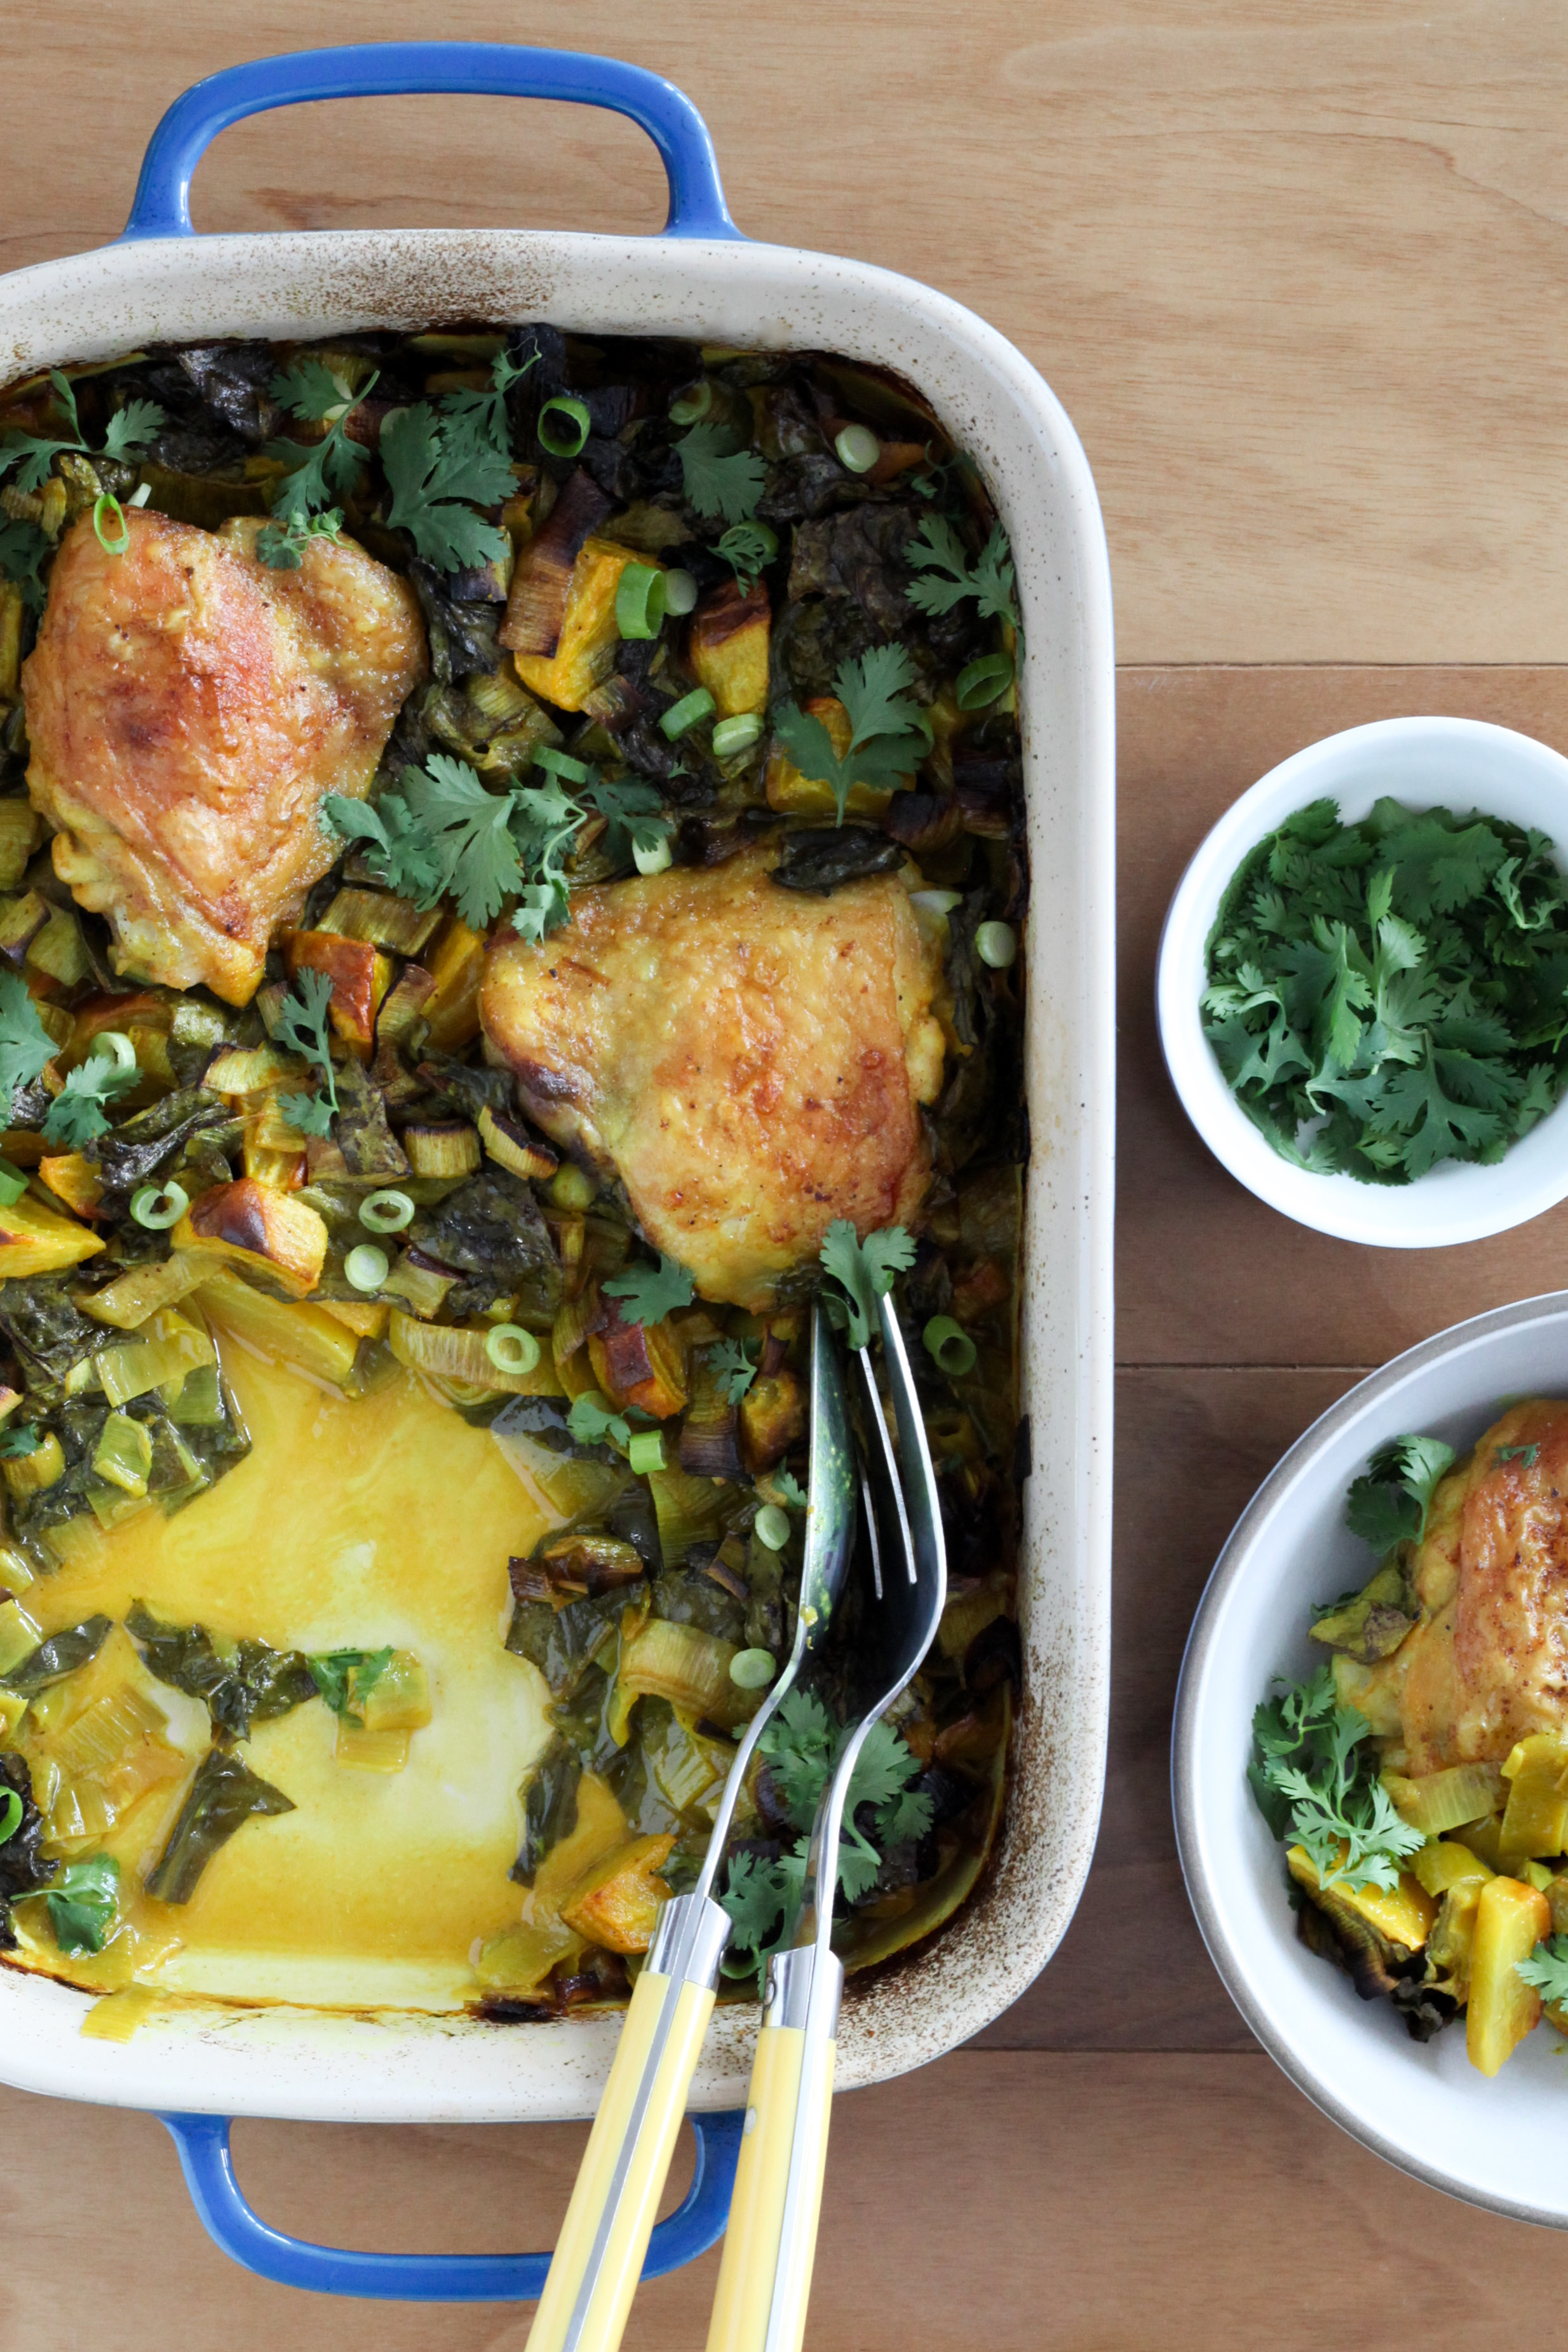 Turmeric Braised Chicken Thighs With Golden Beets and Leeks | A Modest Feast | @amodestfeast